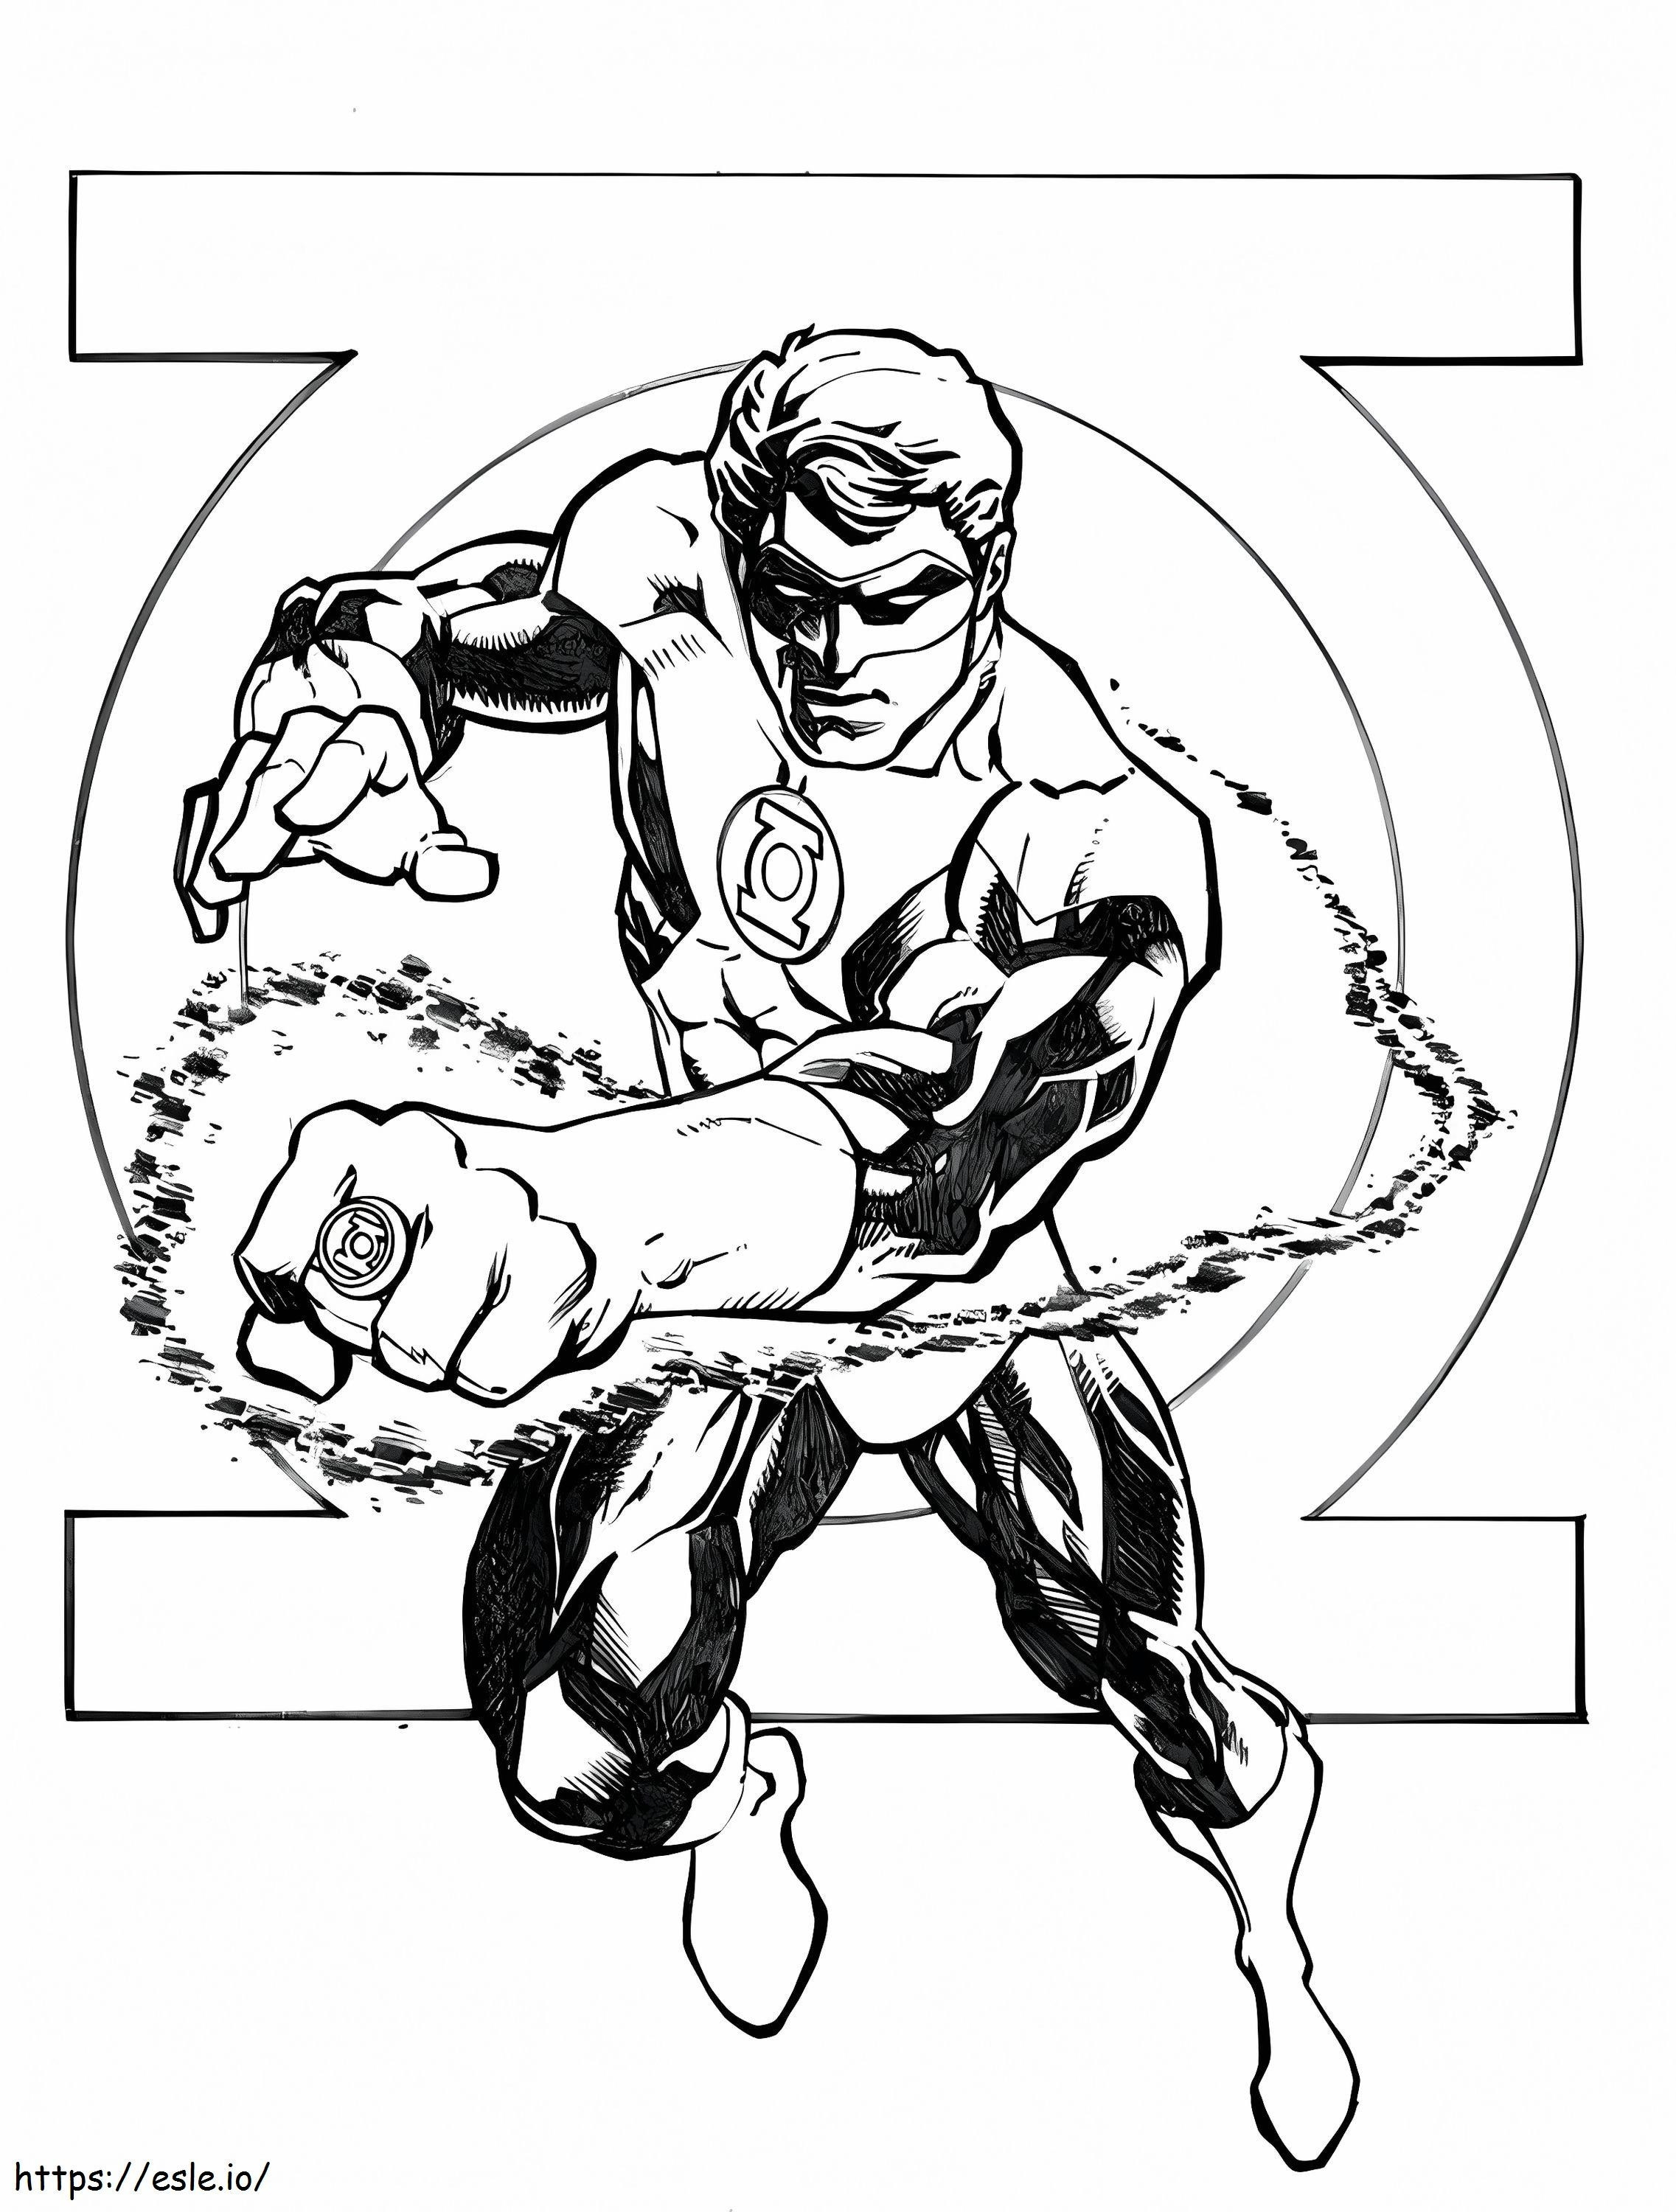 Awesome Green Lantern coloring page